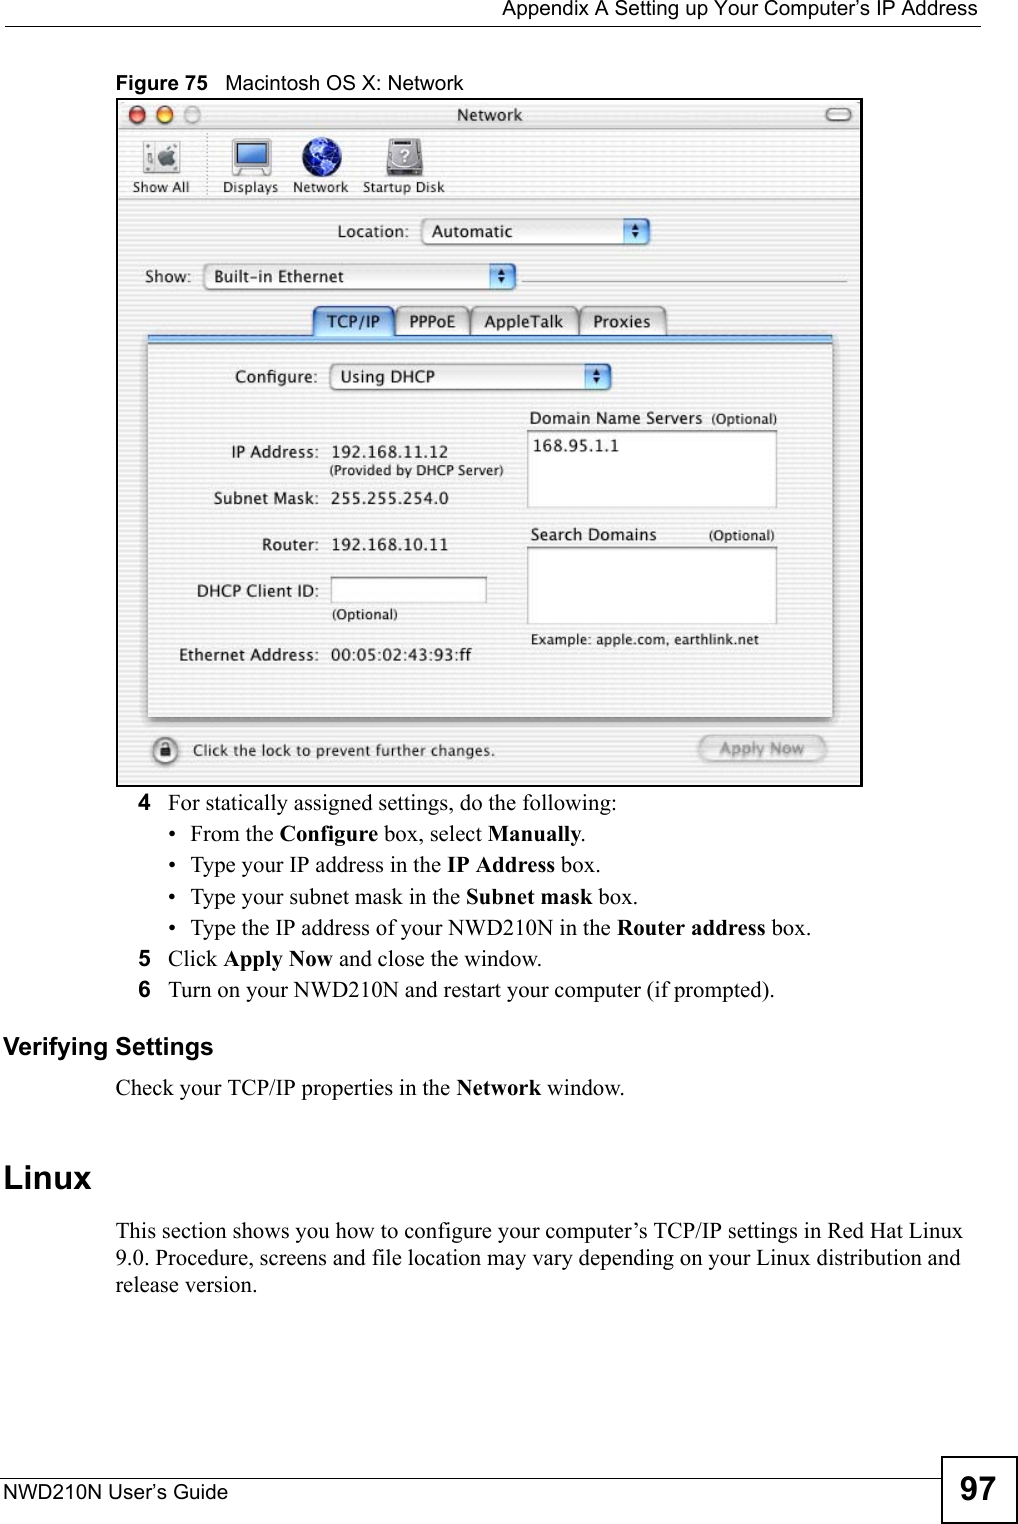  Appendix A Setting up Your Computer’s IP AddressNWD210N User’s Guide 97Figure 75   Macintosh OS X: Network4For statically assigned settings, do the following:•From the Configure box, select Manually.• Type your IP address in the IP Address box.• Type your subnet mask in the Subnet mask box.• Type the IP address of your NWD210N in the Router address box.5Click Apply Now and close the window.6Turn on your NWD210N and restart your computer (if prompted).Verifying SettingsCheck your TCP/IP properties in the Network window.Linux This section shows you how to configure your computer’s TCP/IP settings in Red Hat Linux 9.0. Procedure, screens and file location may vary depending on your Linux distribution and release version. 